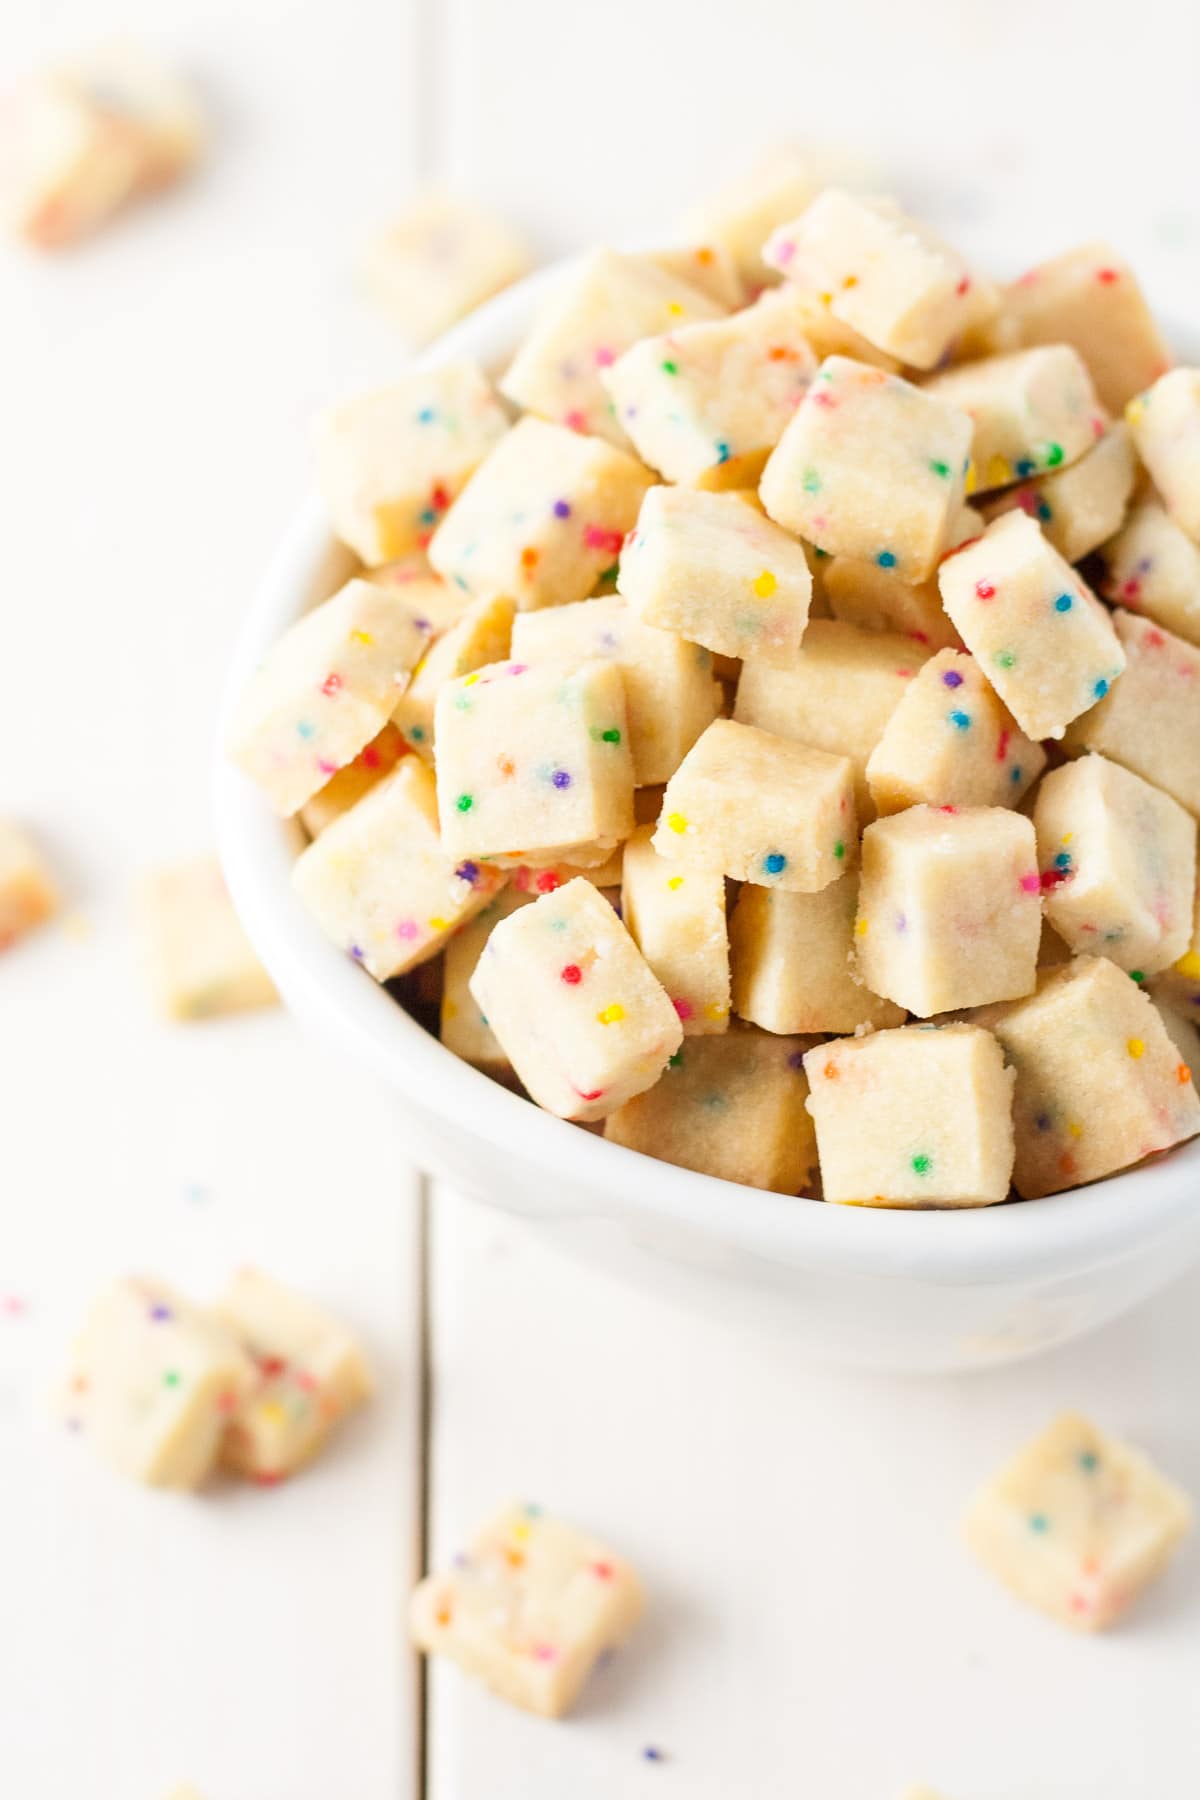 Teeny tiny shortbread cookies studded with rainbow sprinkles. So addictive, the kids will love these! A simple change in the color of the sprinkles and you're set for any holiday or event. | livforcake.com